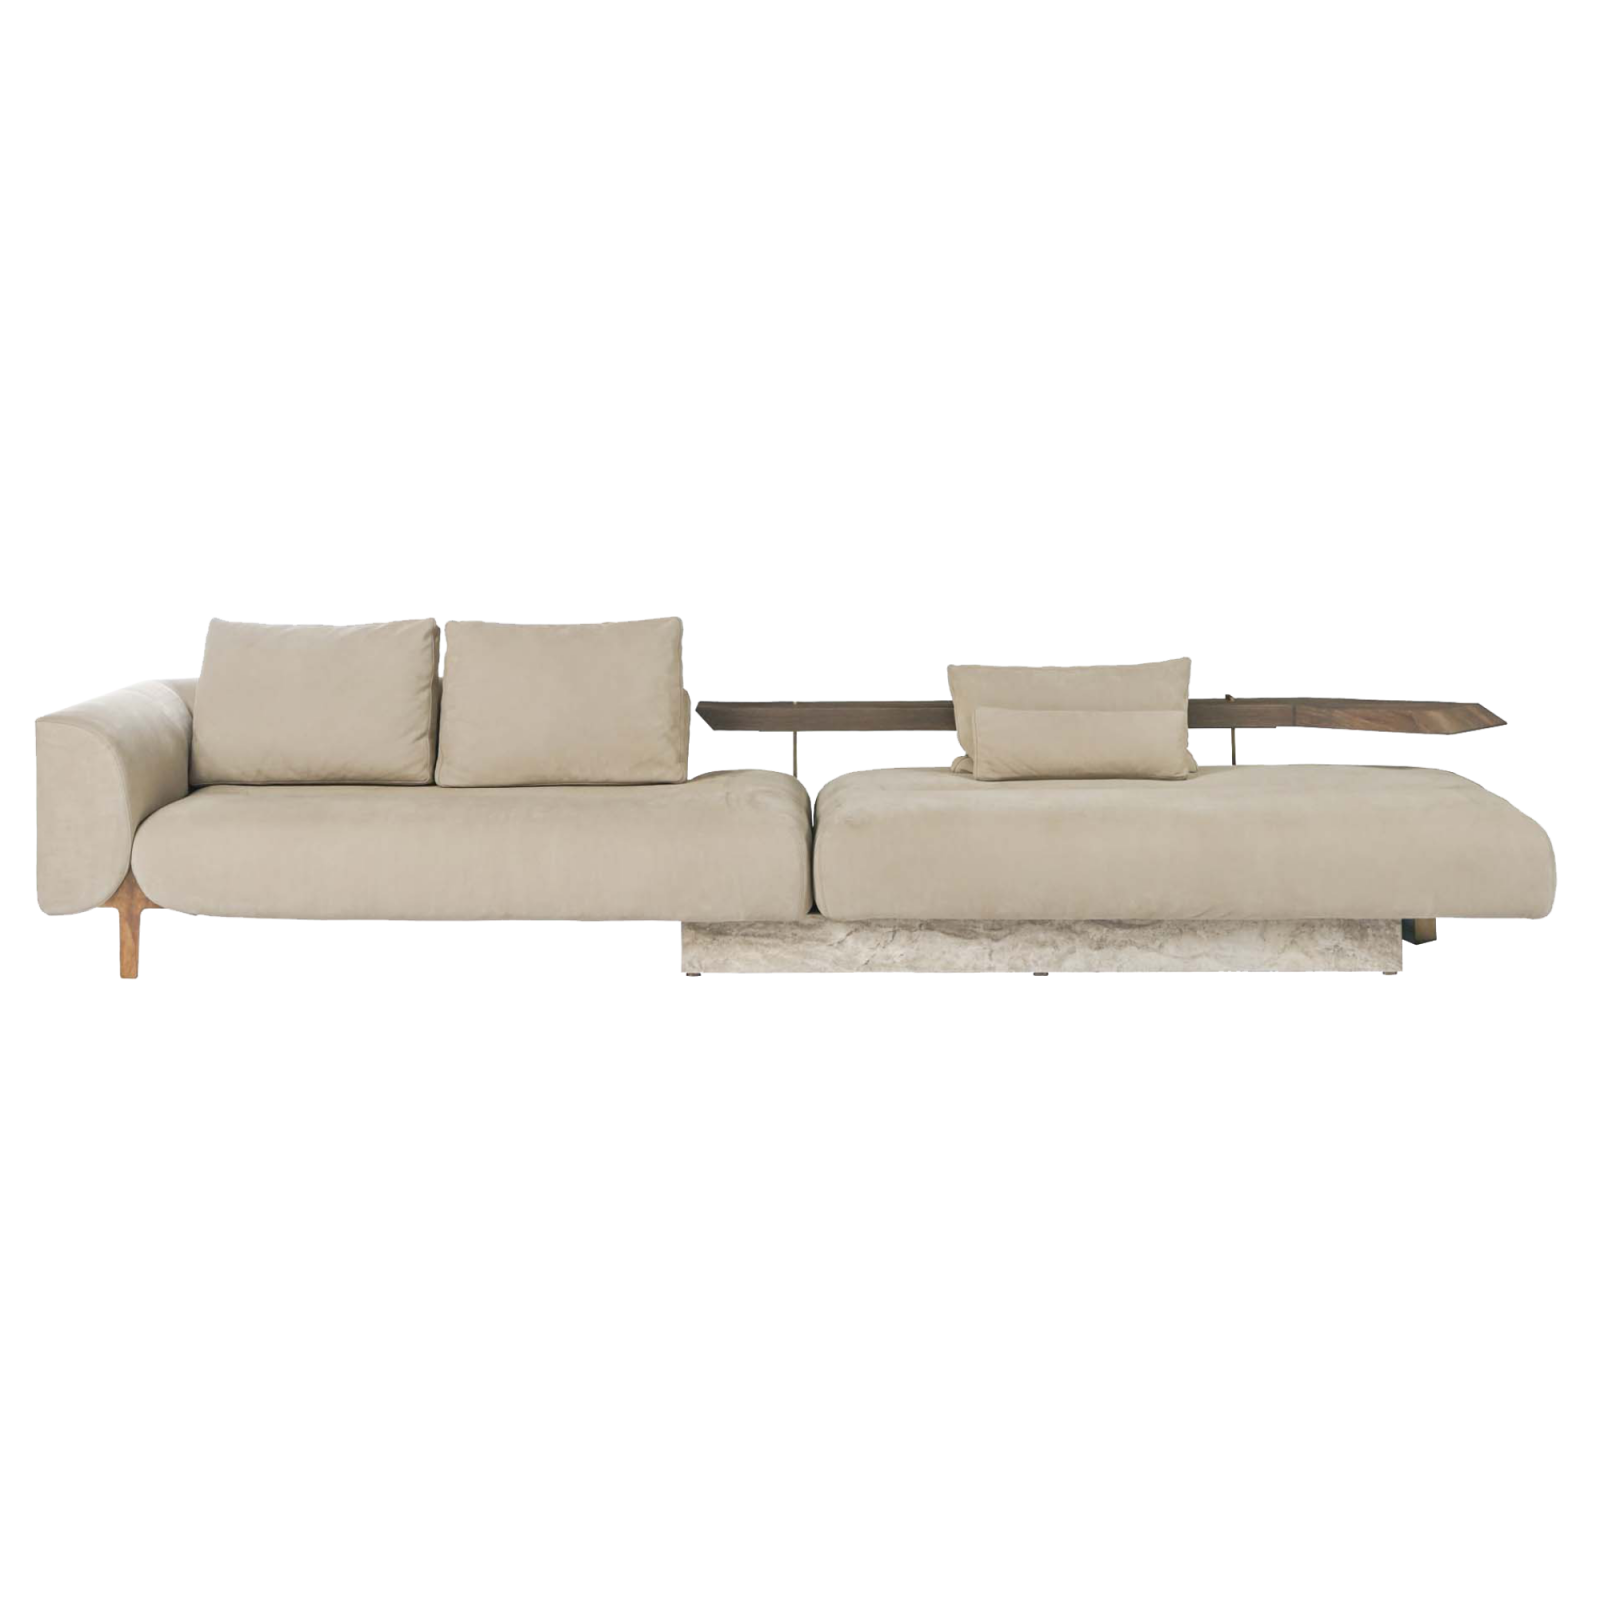 Canyon Sofa with walnut cover and aged brass meets with the unmatched texture of travertine marble.